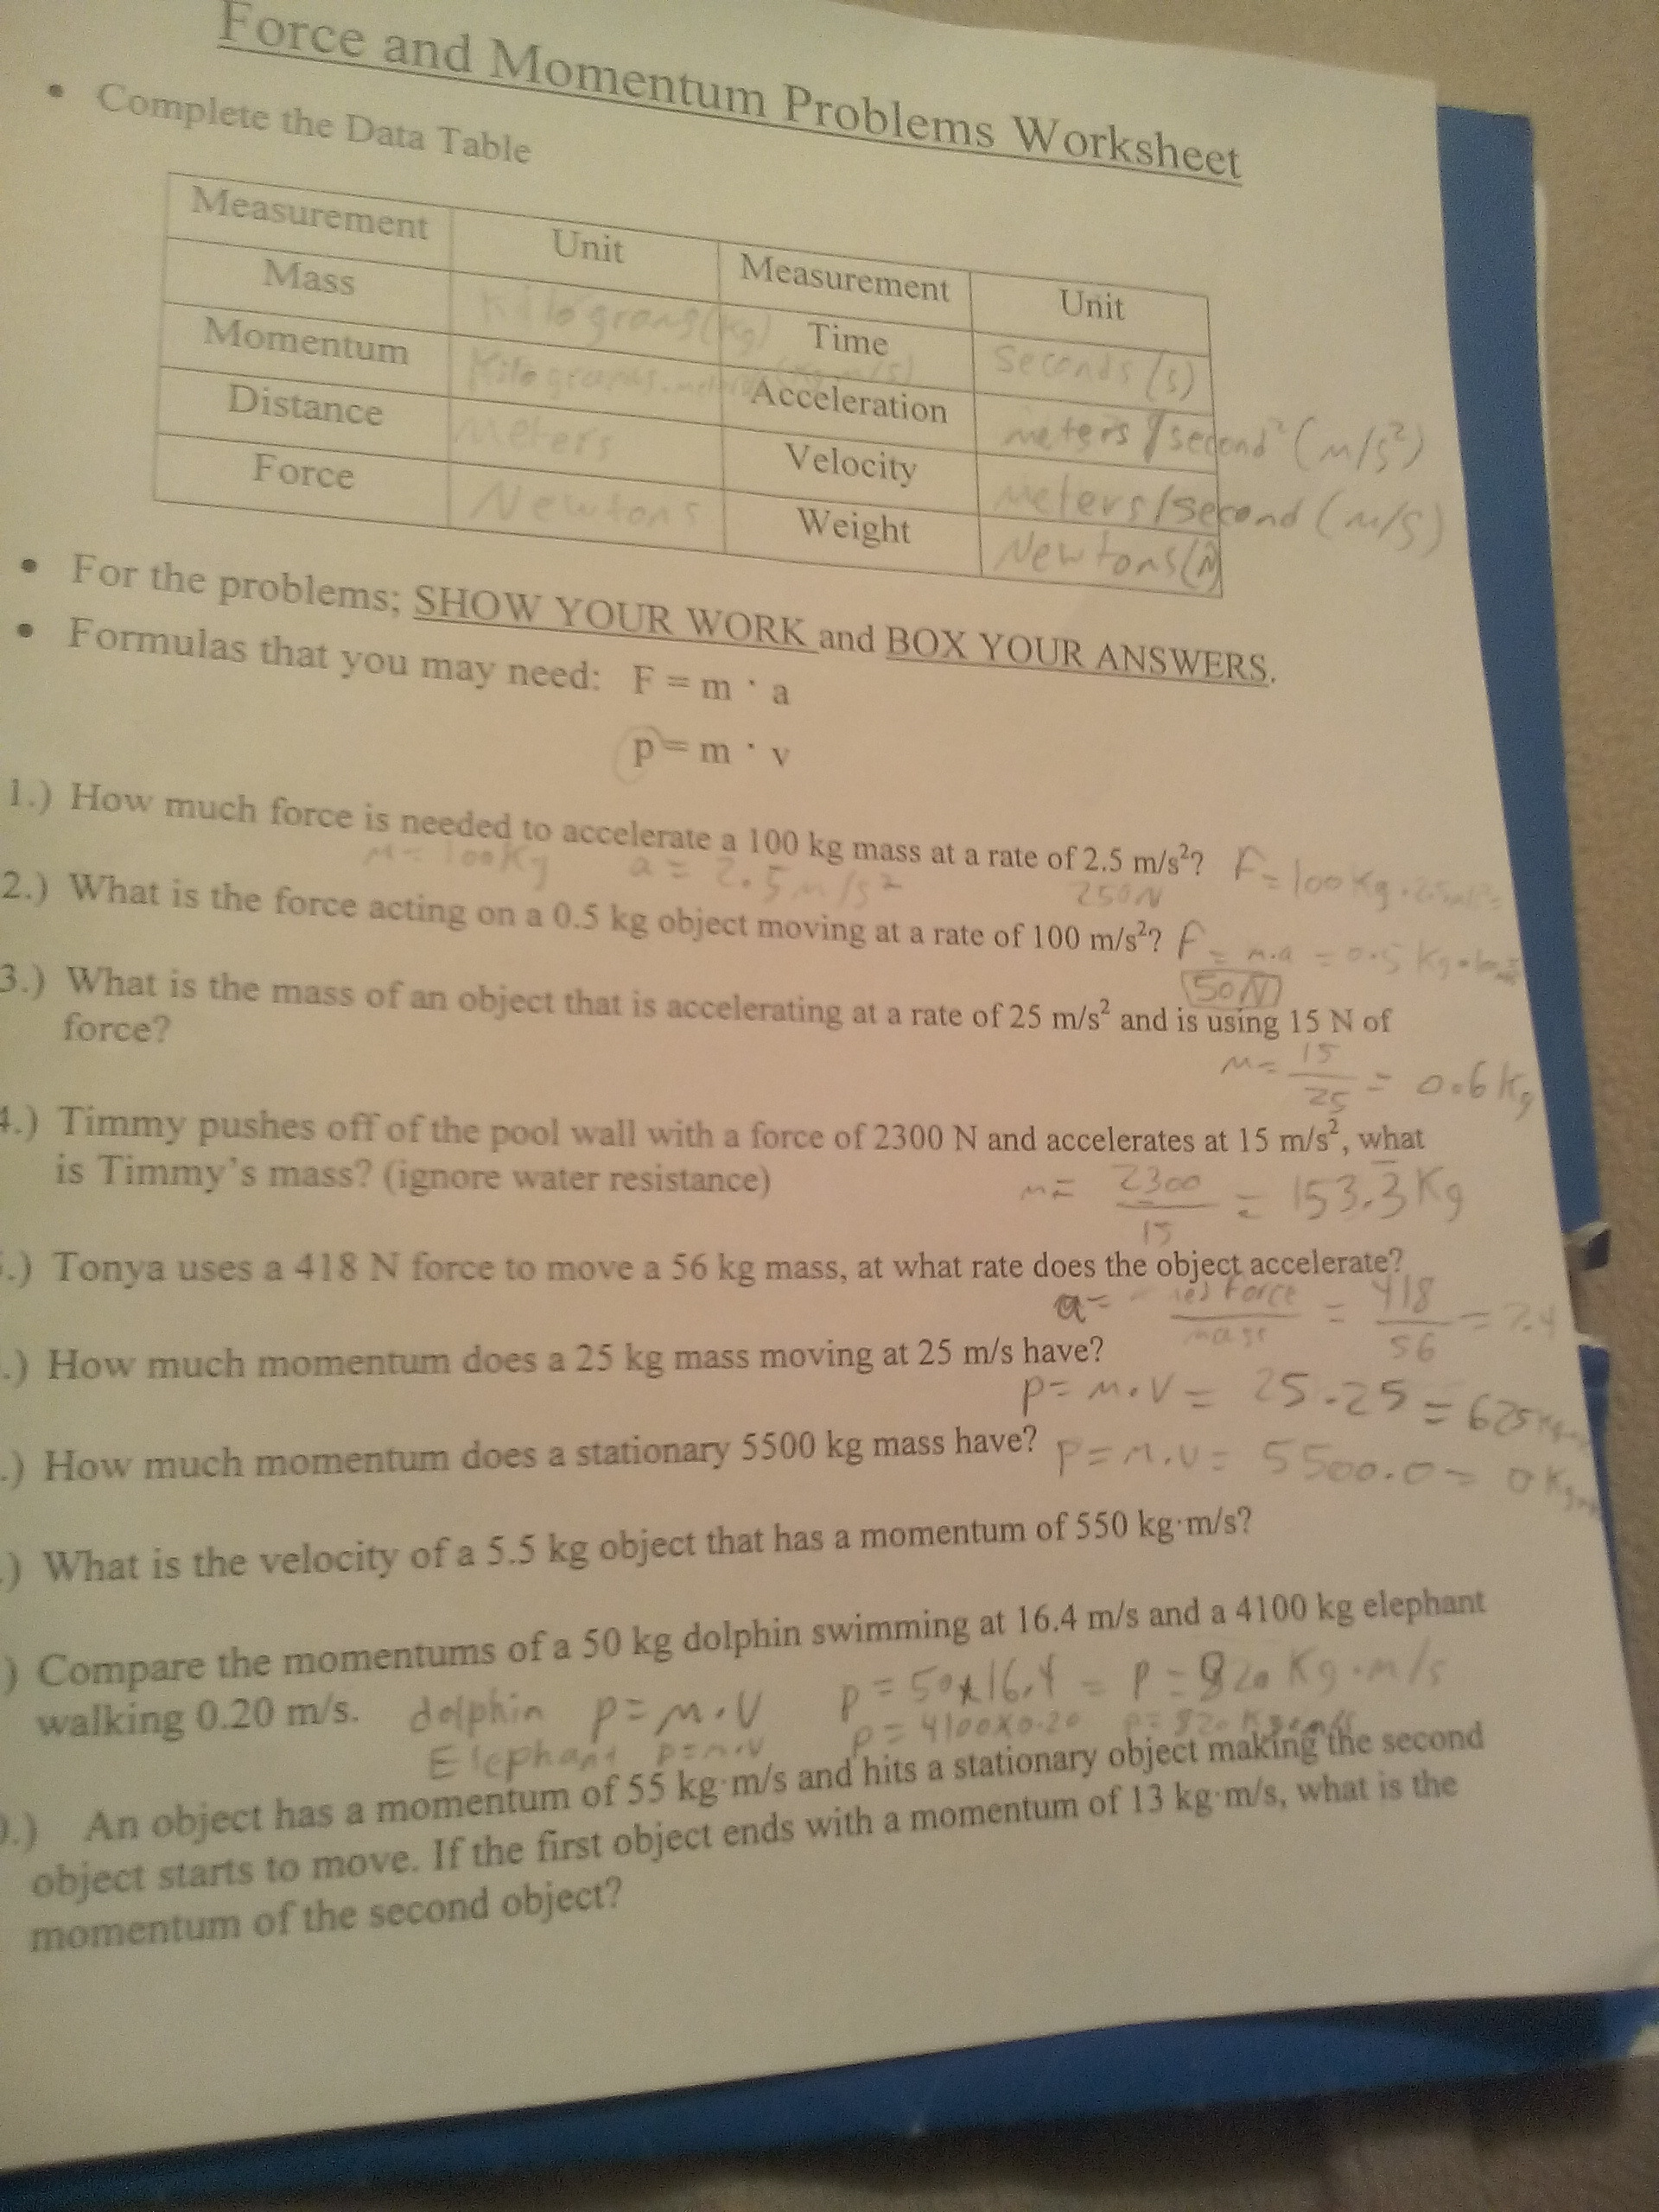 Force And Momentum Problems Worksheet Answers  Power Of Knowledge